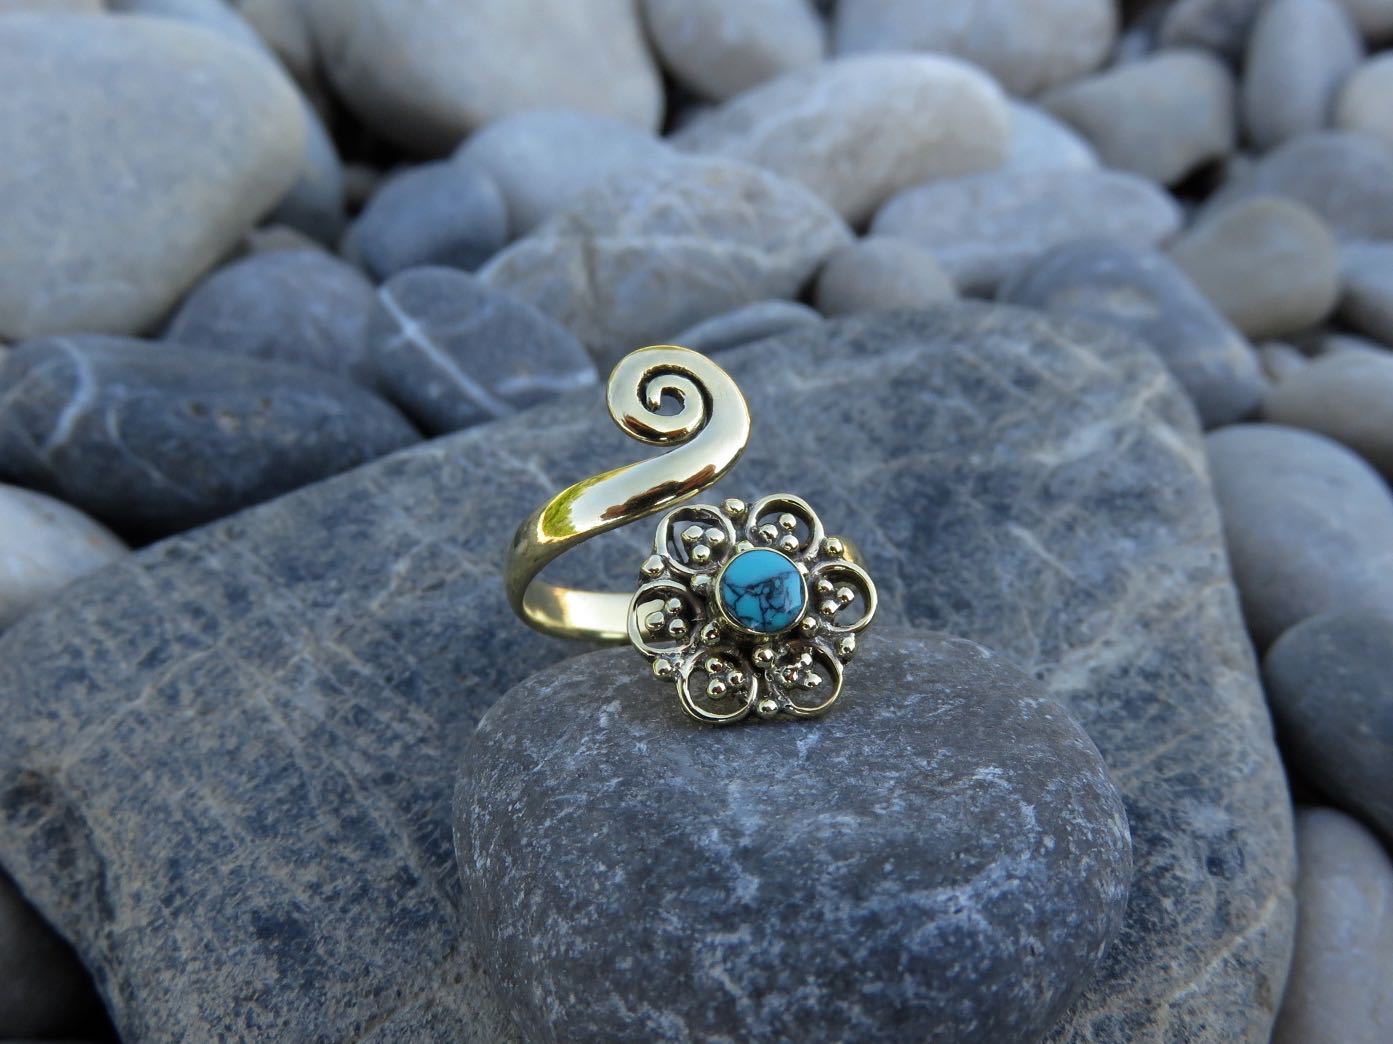 Toe ring with flower and spiral made of brass 